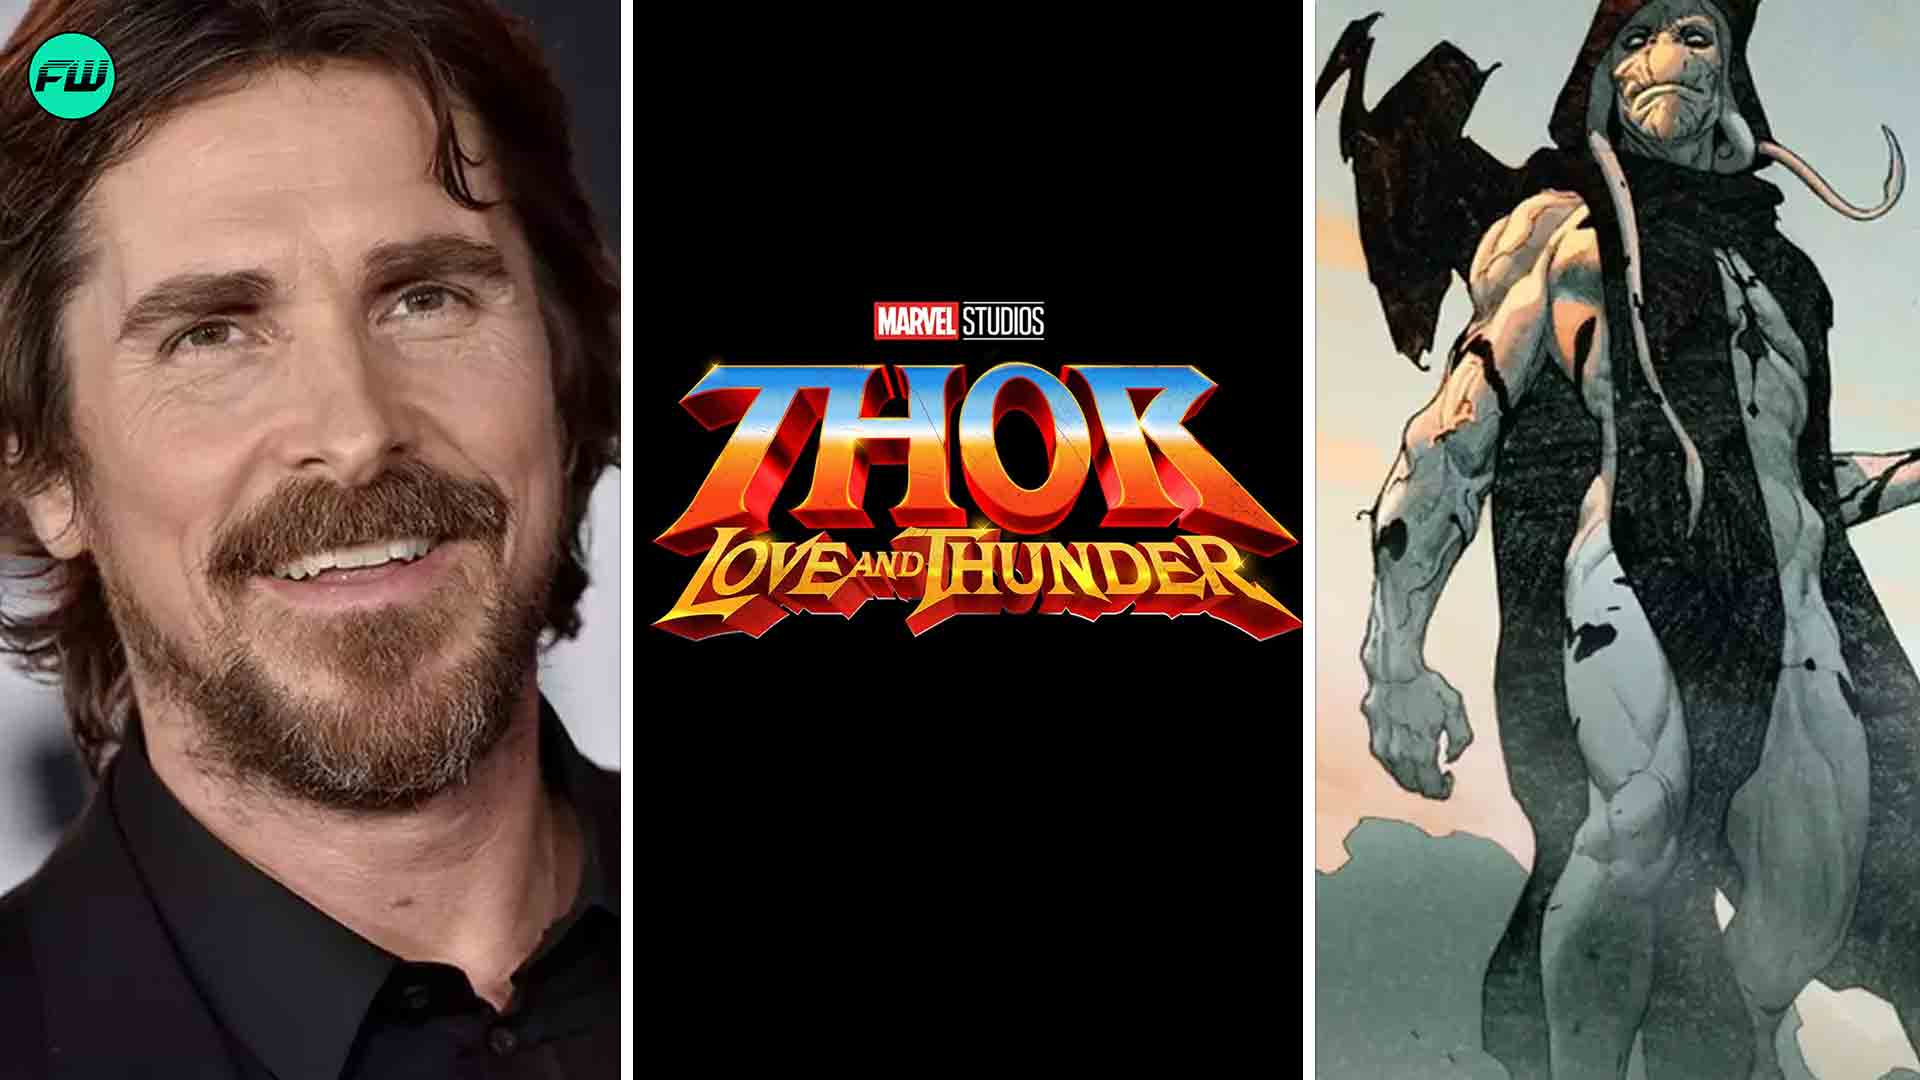 Christian Bale's Gorr The God Butcher Look In Thor: Love And Thunder  Revealed